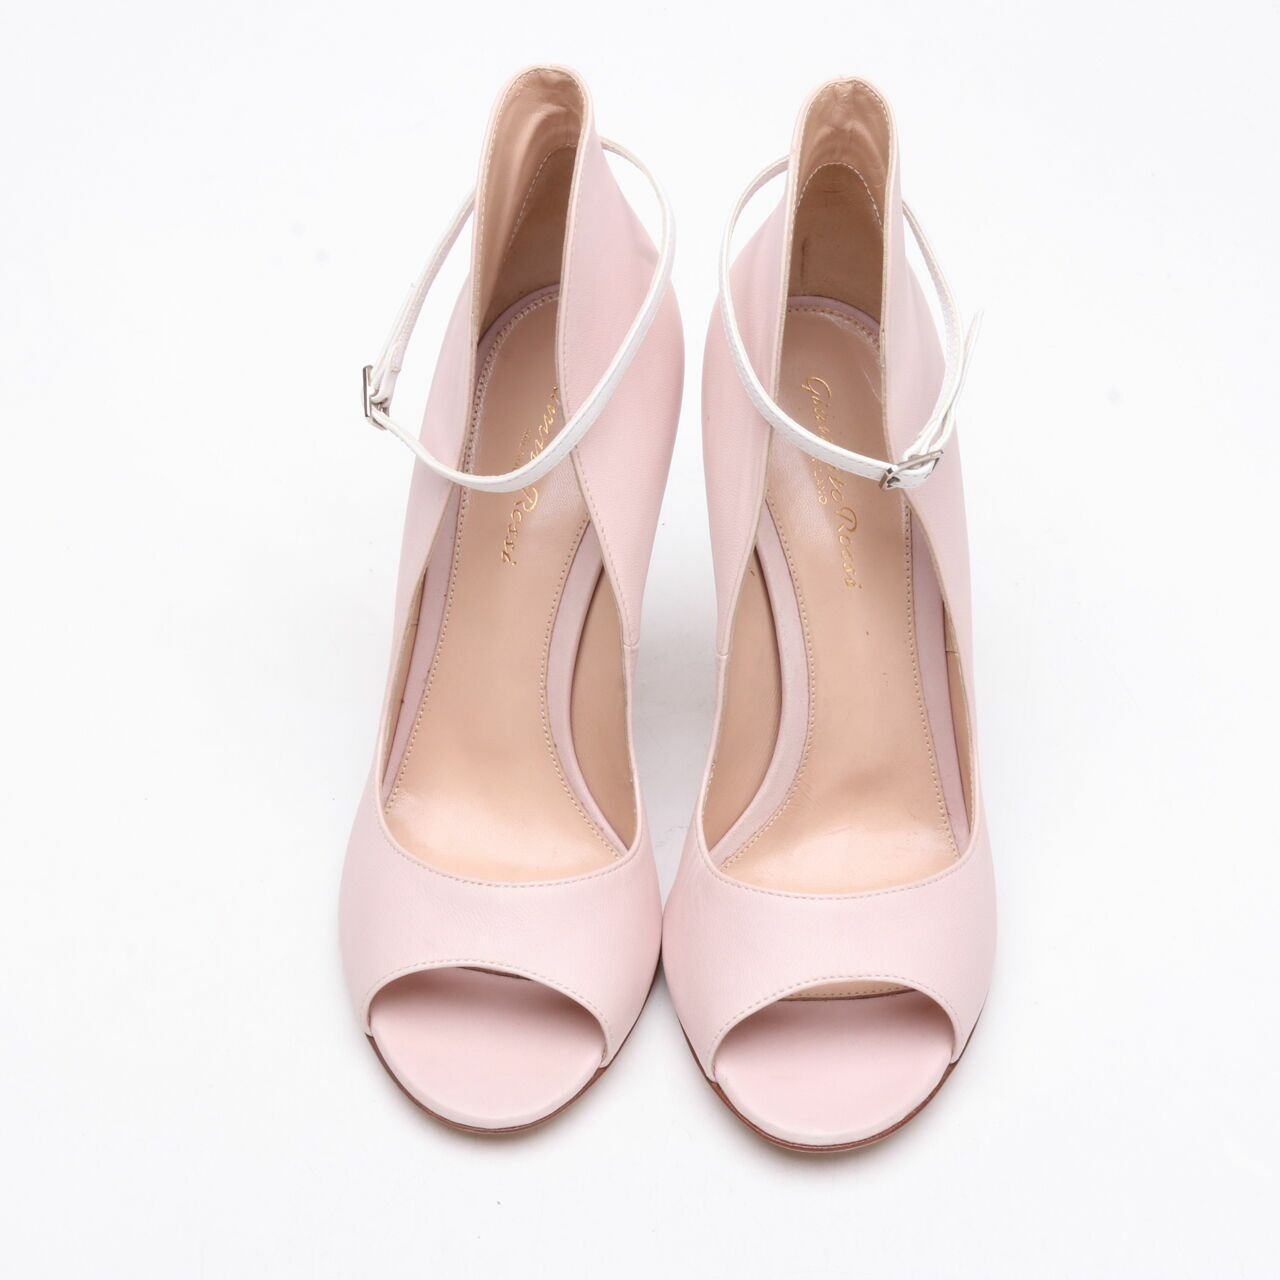 Gianvito Rossi Heels Pink Poudre